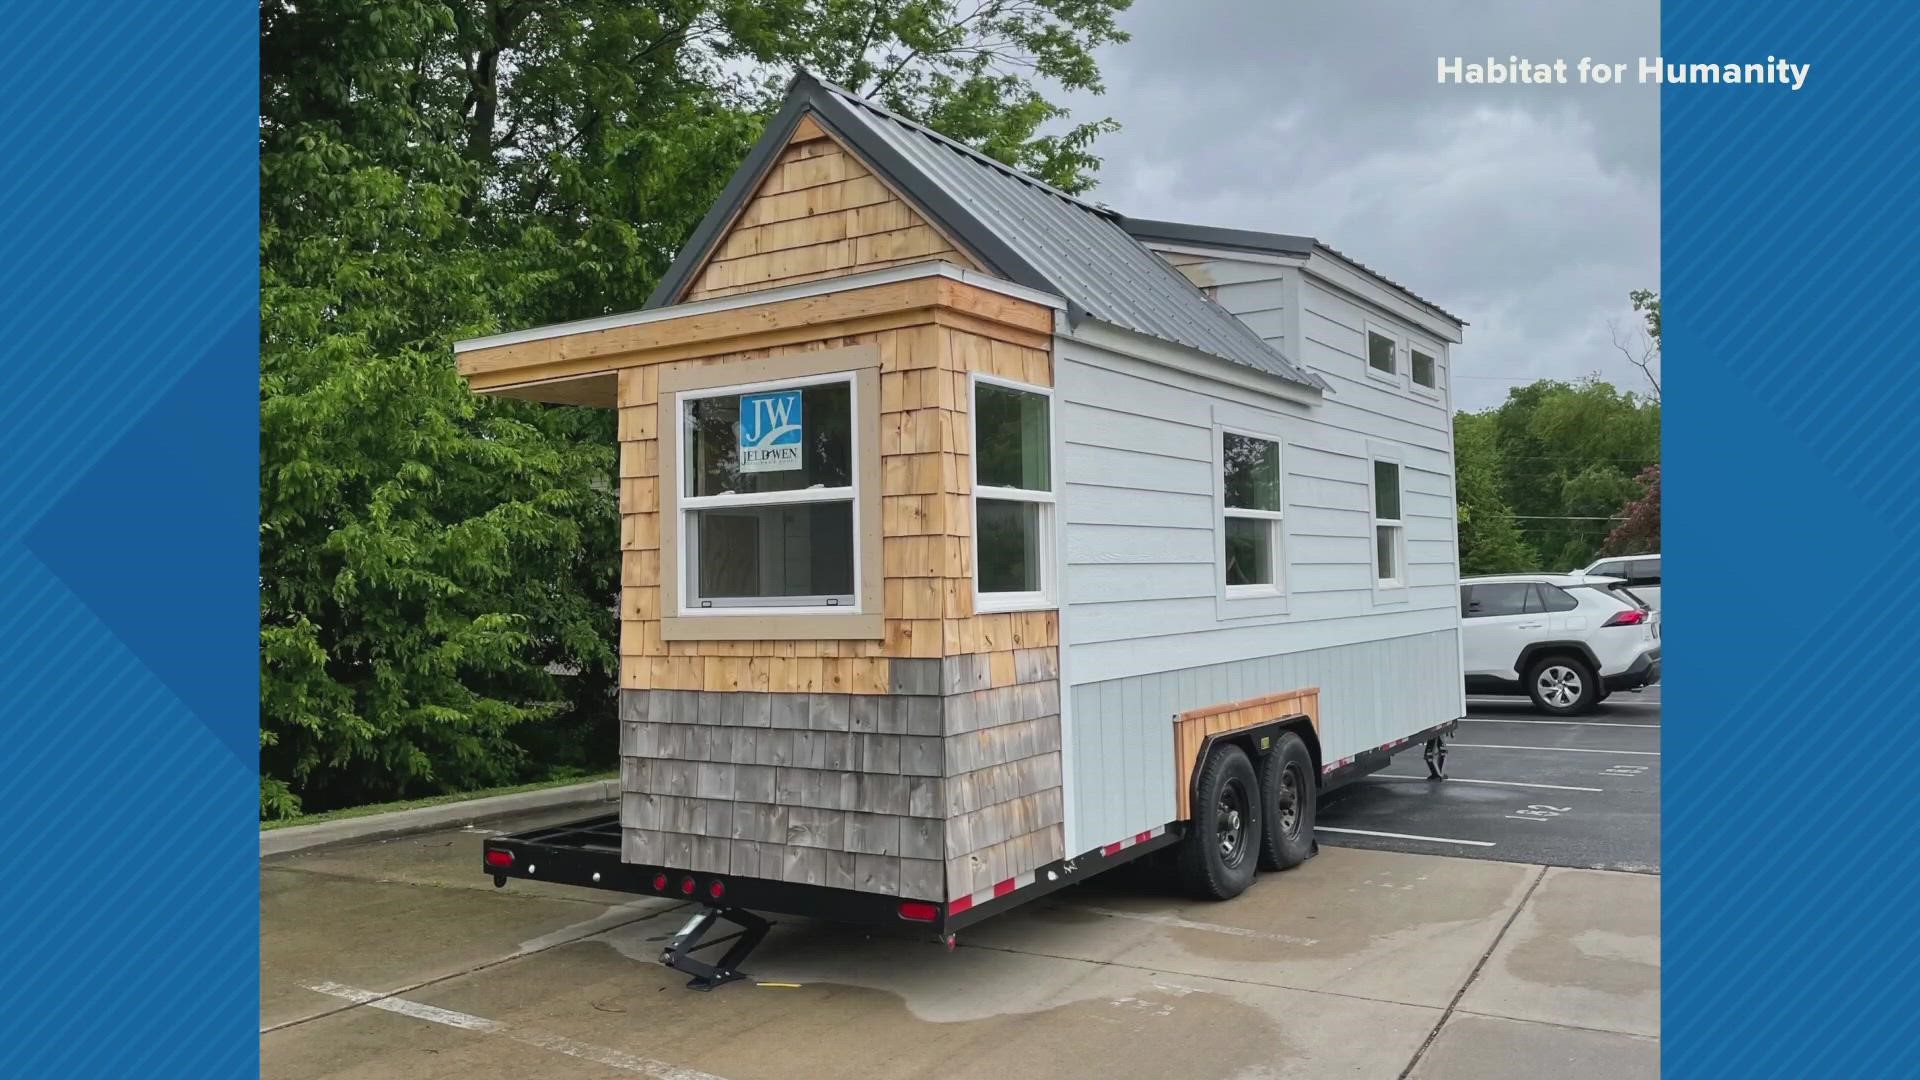 Hours after the tiny home was reported stolen, it was recovered, Des Peres Department of Public Safety Director Eric Hall tells 5 On Your Side.